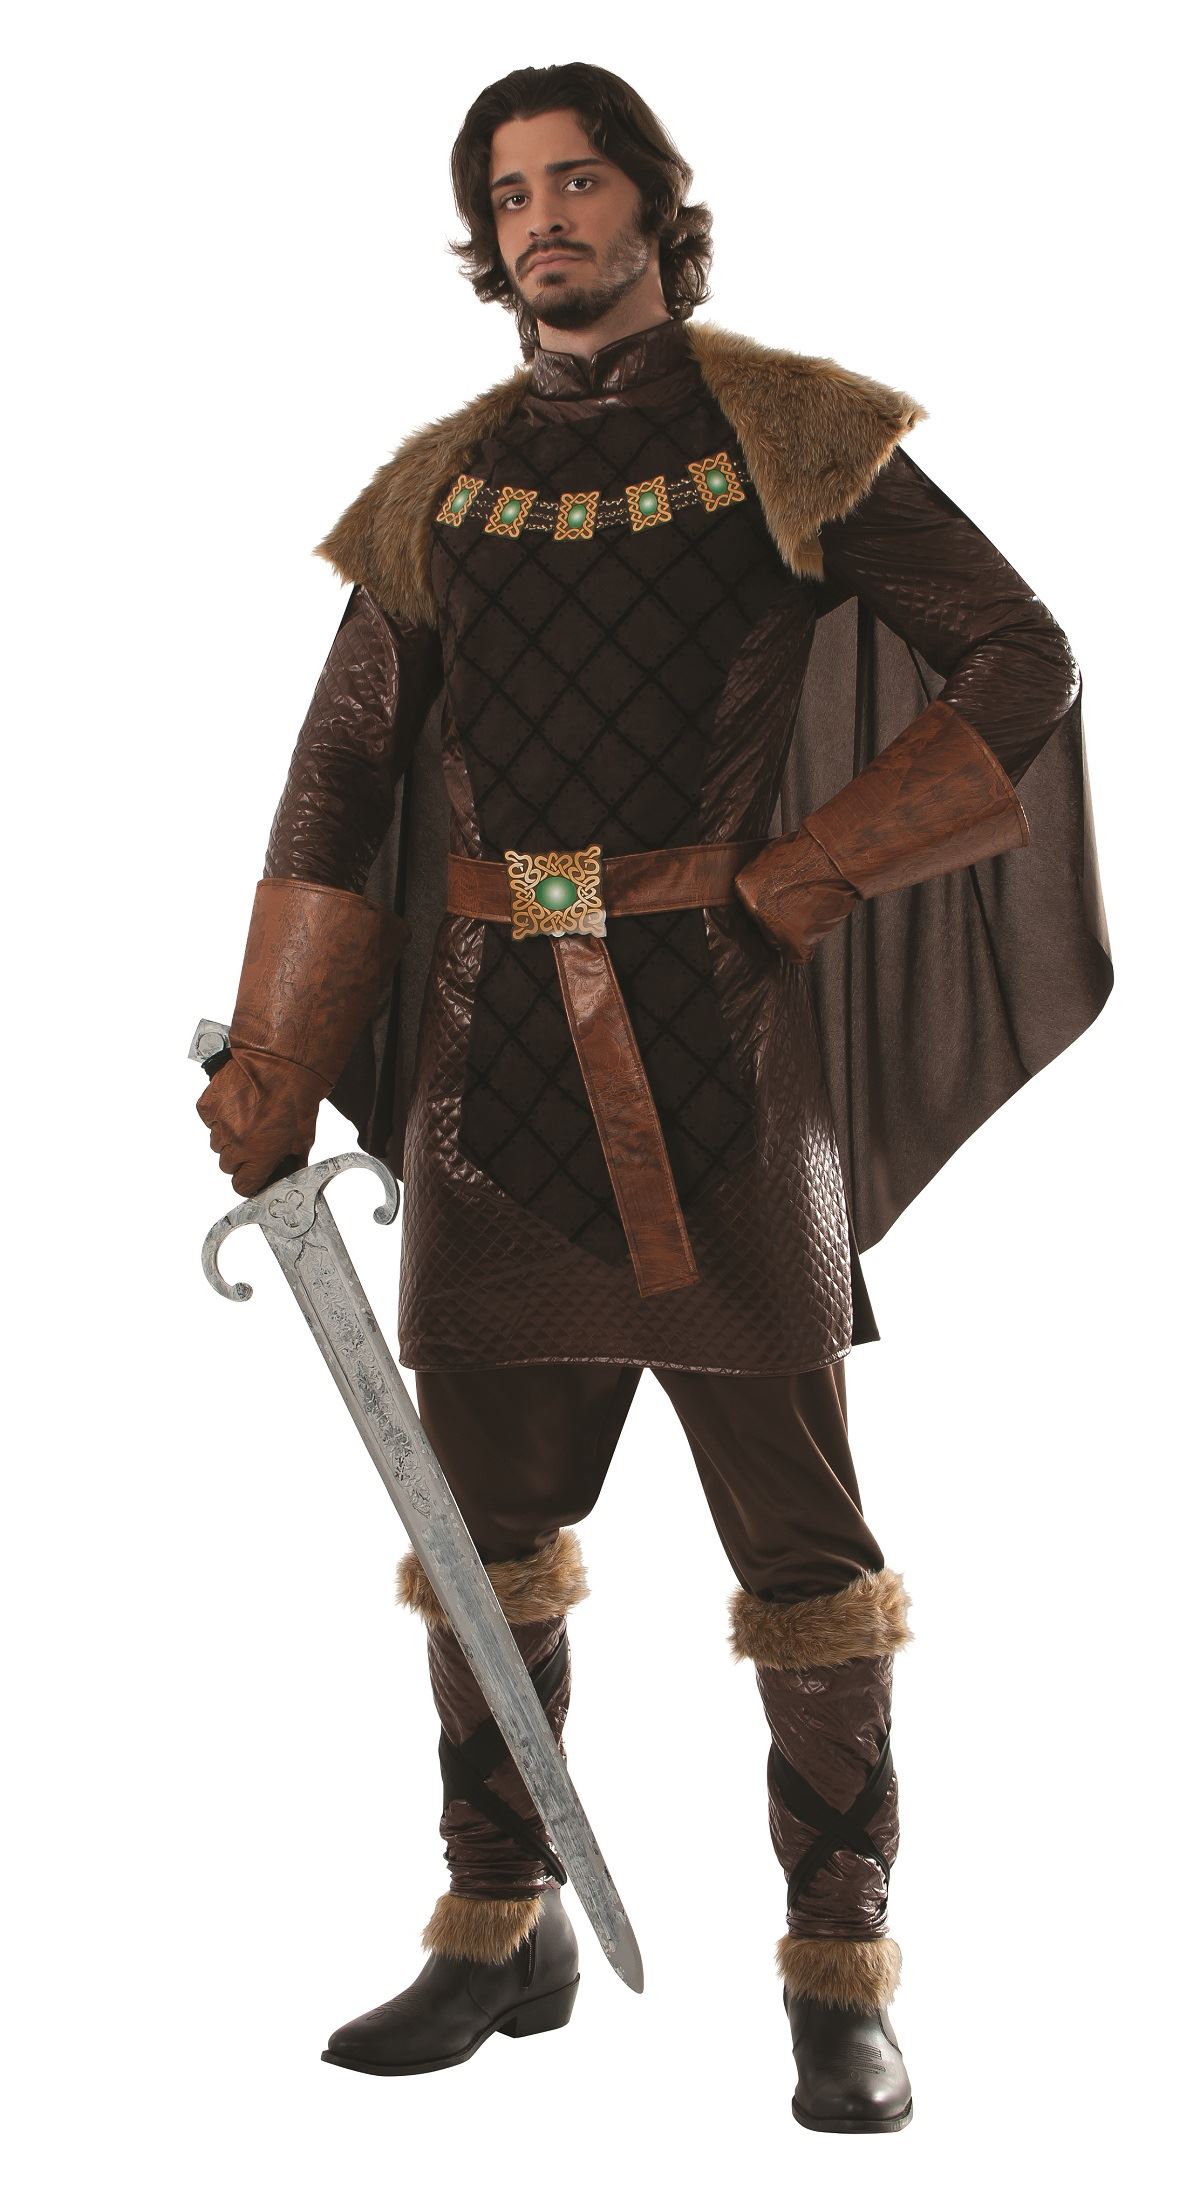 Medieval Prince Costumes For Men